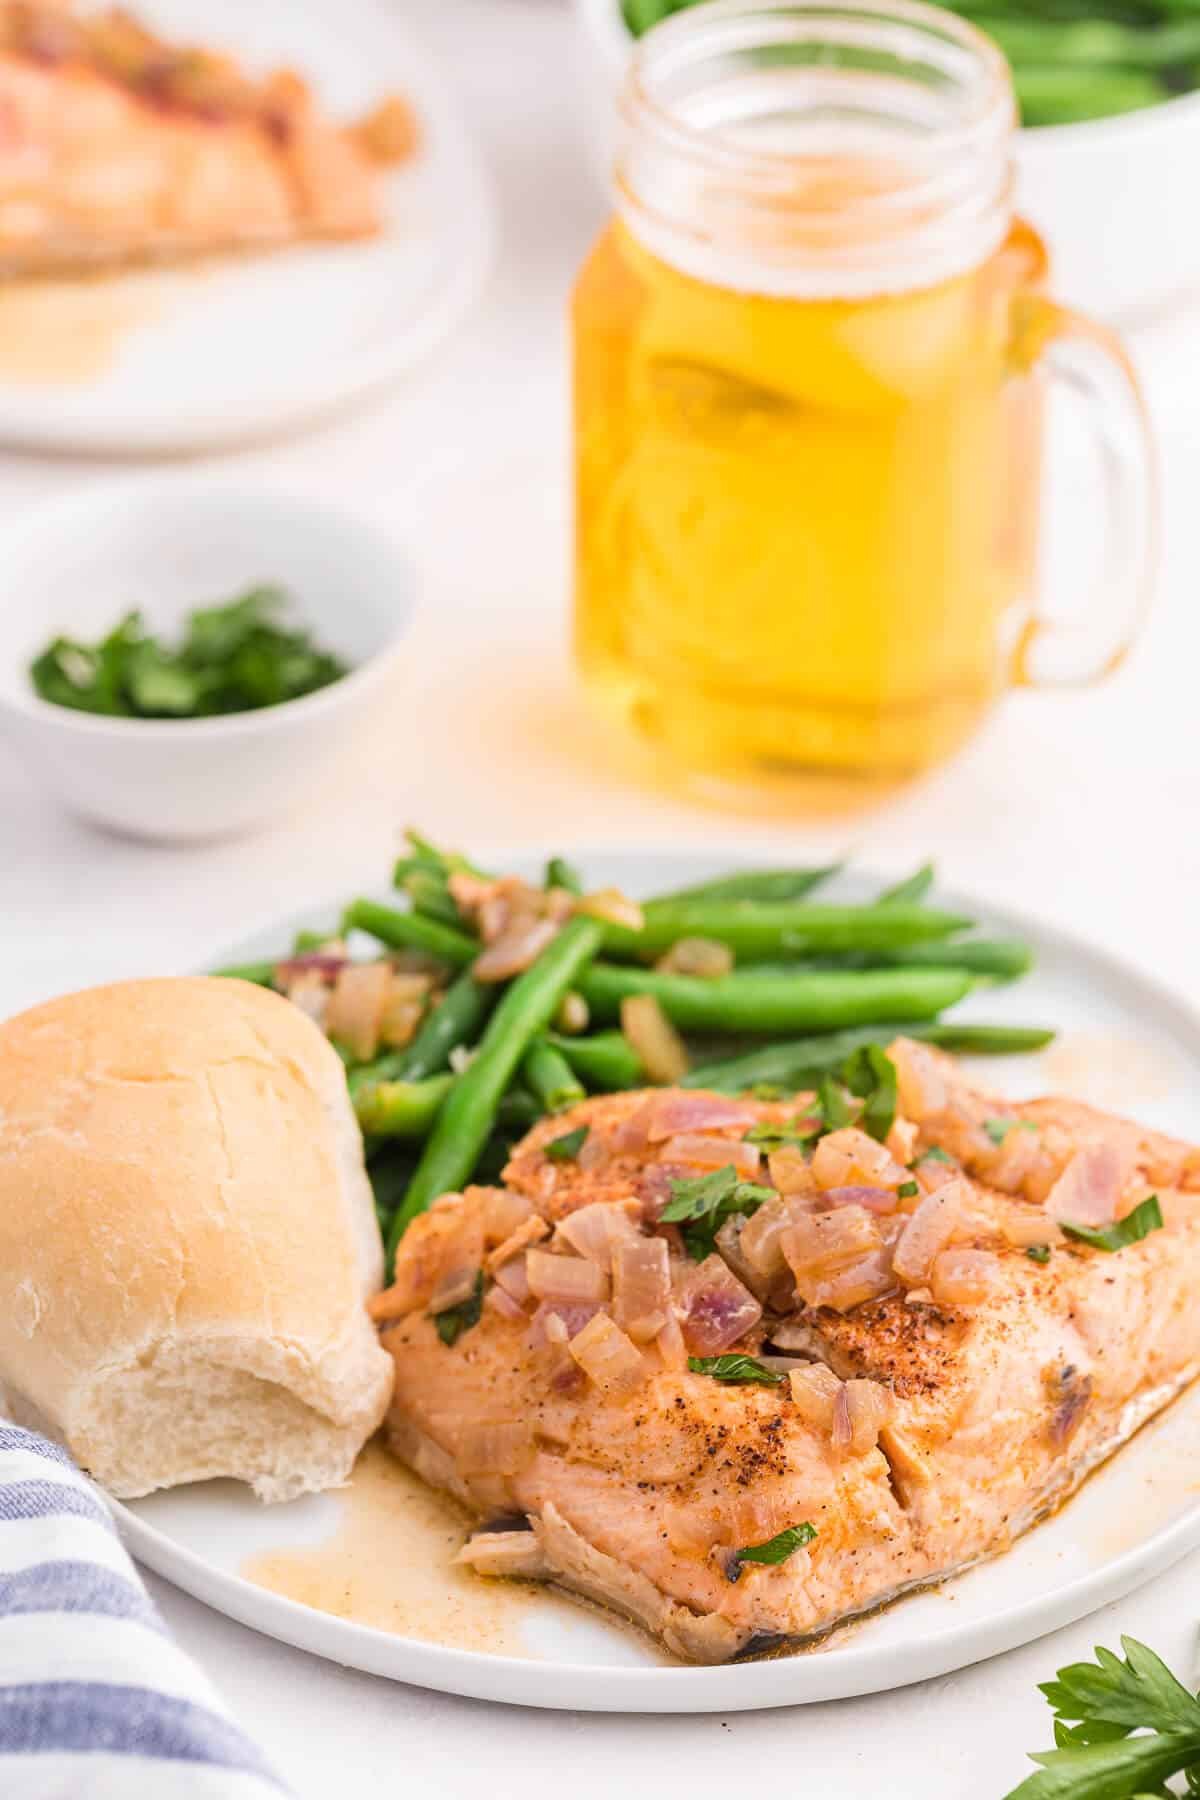 Drunken salmon with a roll and green beans on a plate.